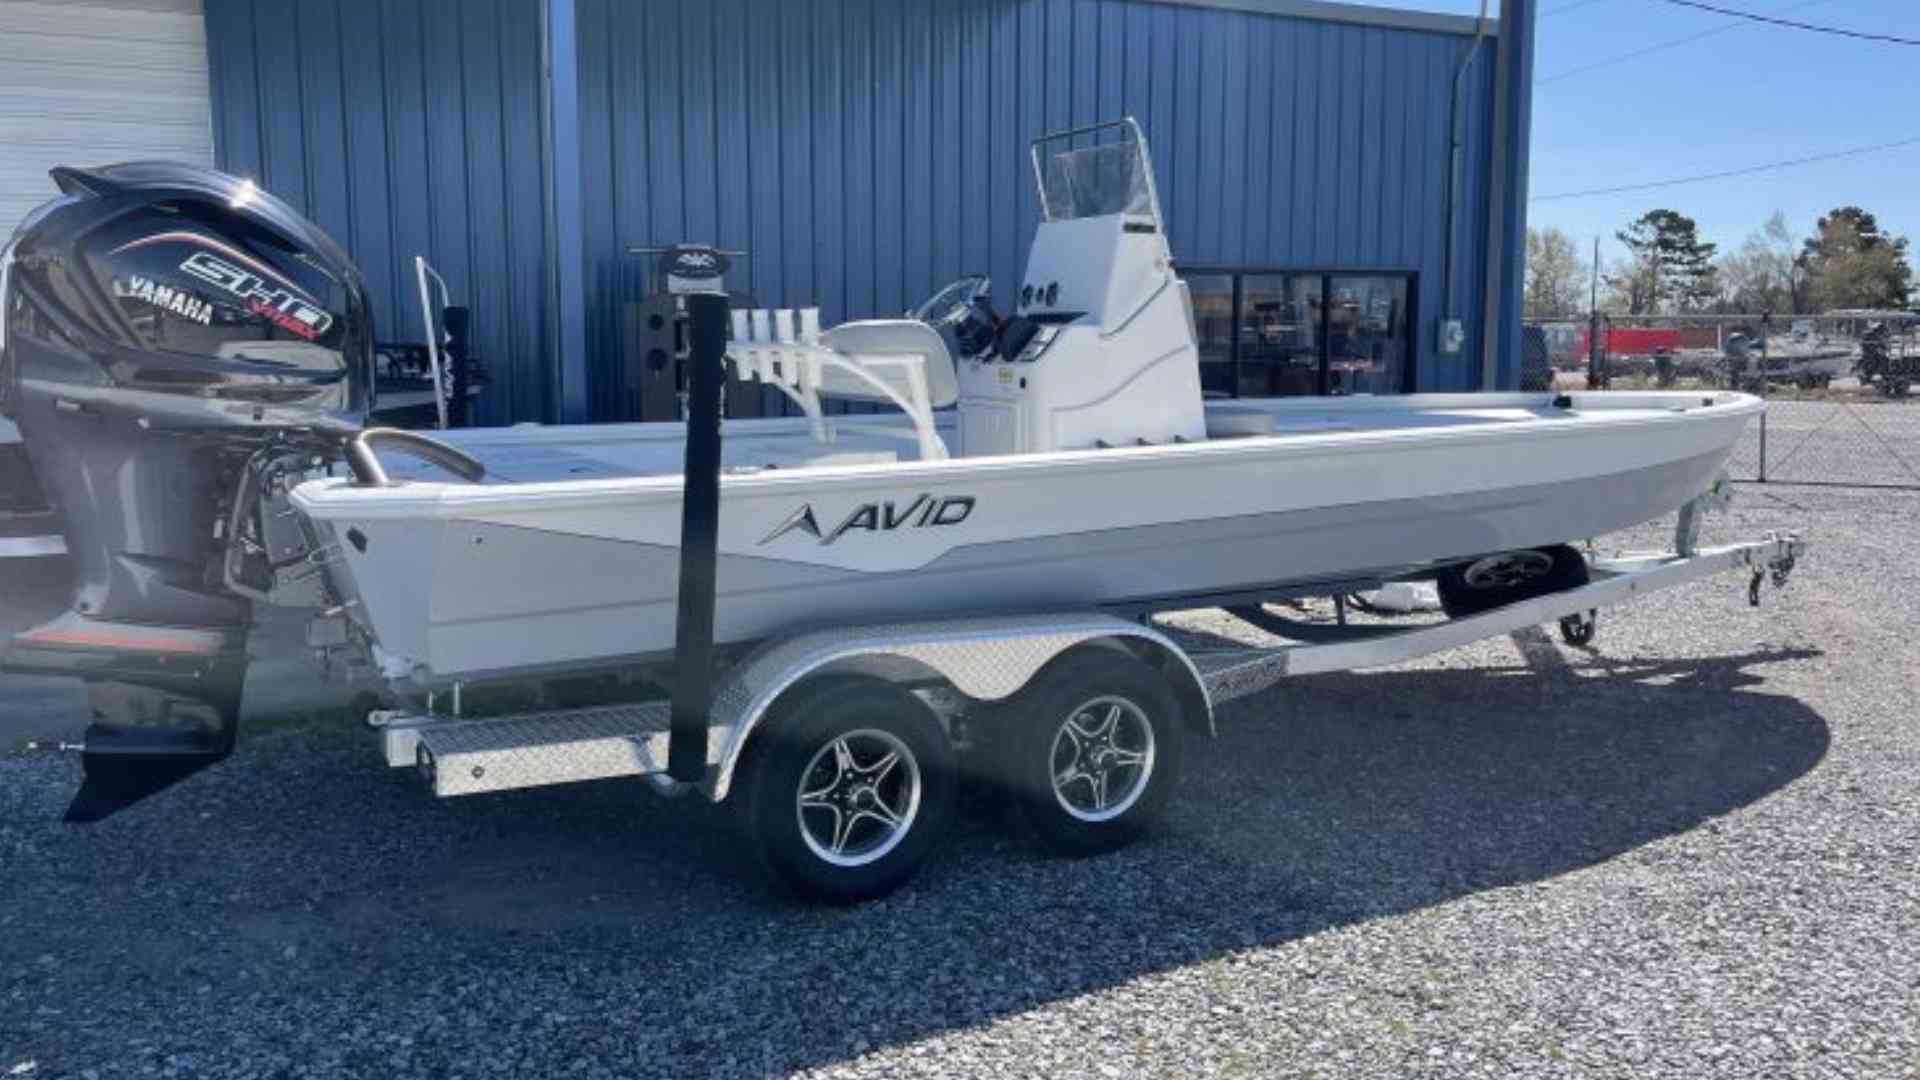 Common Problems of Avid Boats | Explained